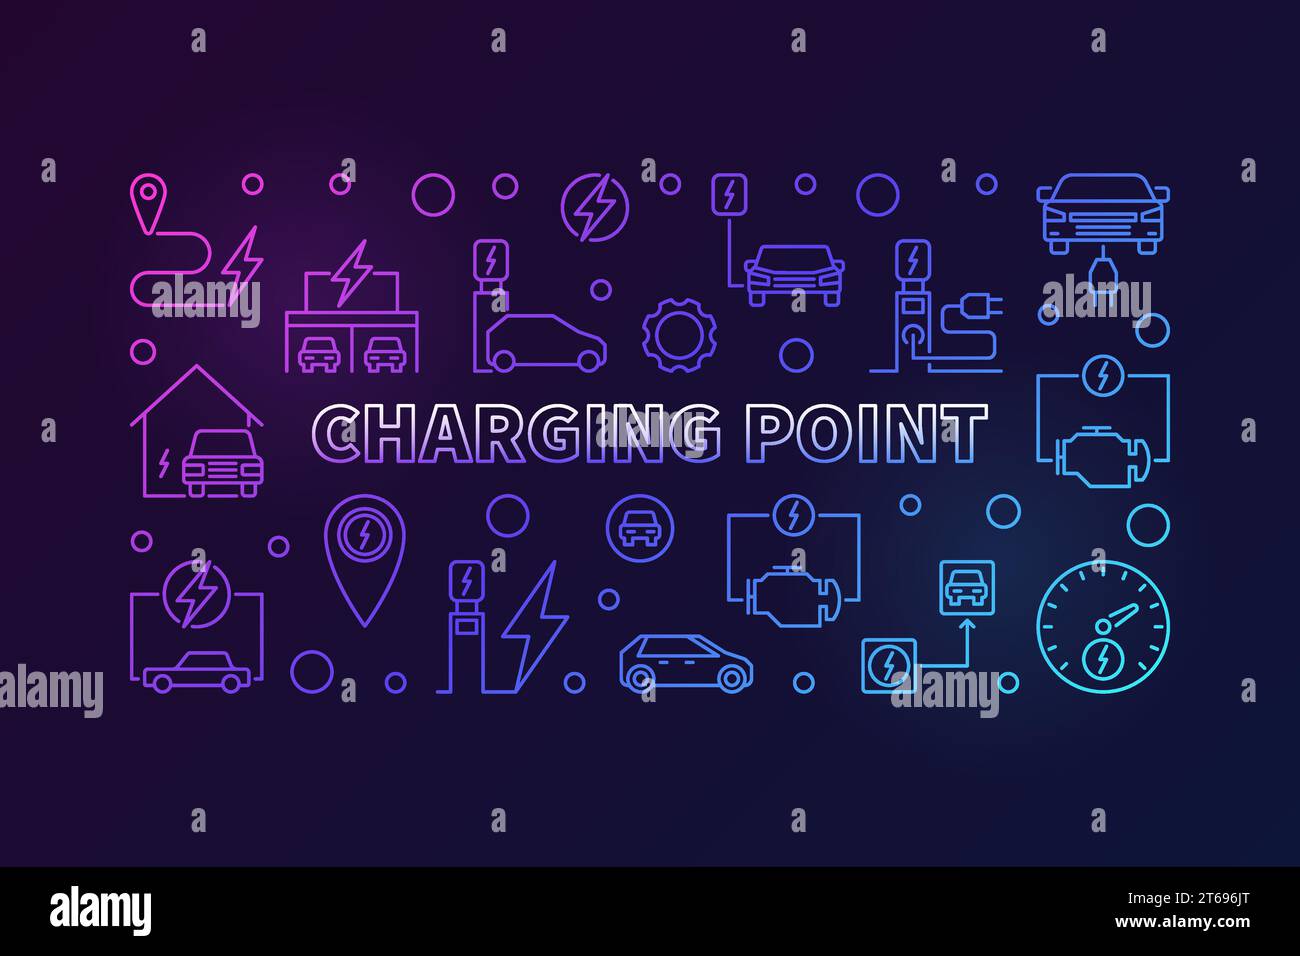 Charging point colored linear illustration - vector EV charge point concept horizontal banner on dark background Stock Vector